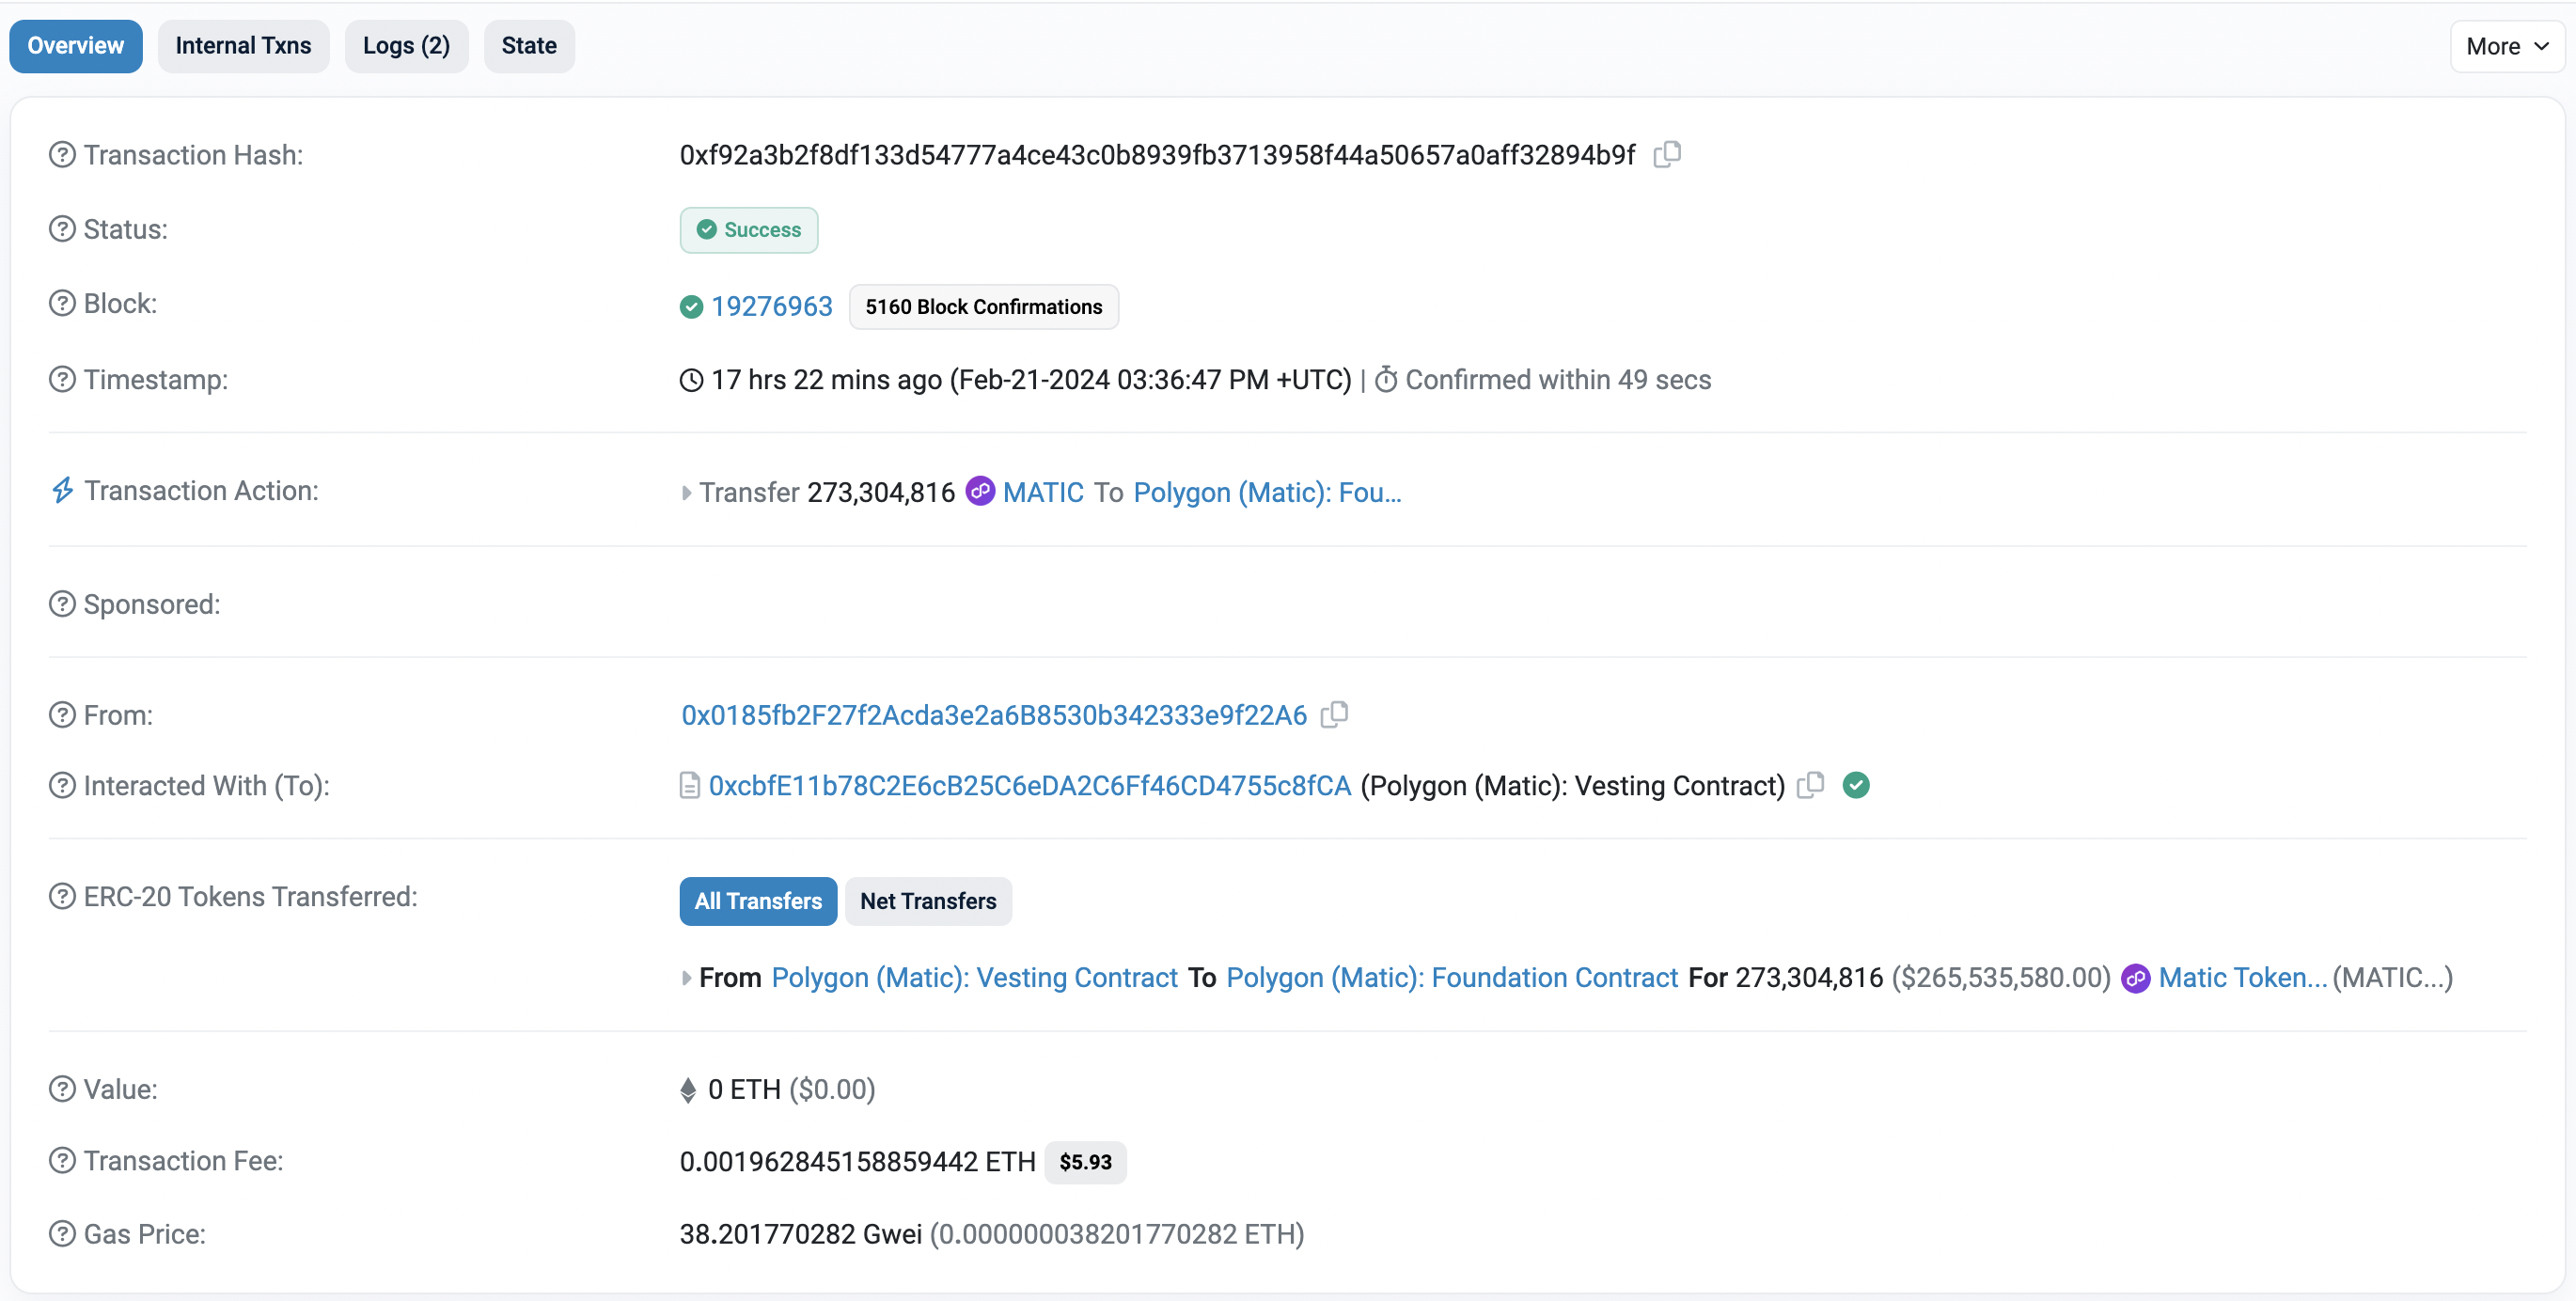 Etherscan: Polygon Vesting Contract Transaction Hash